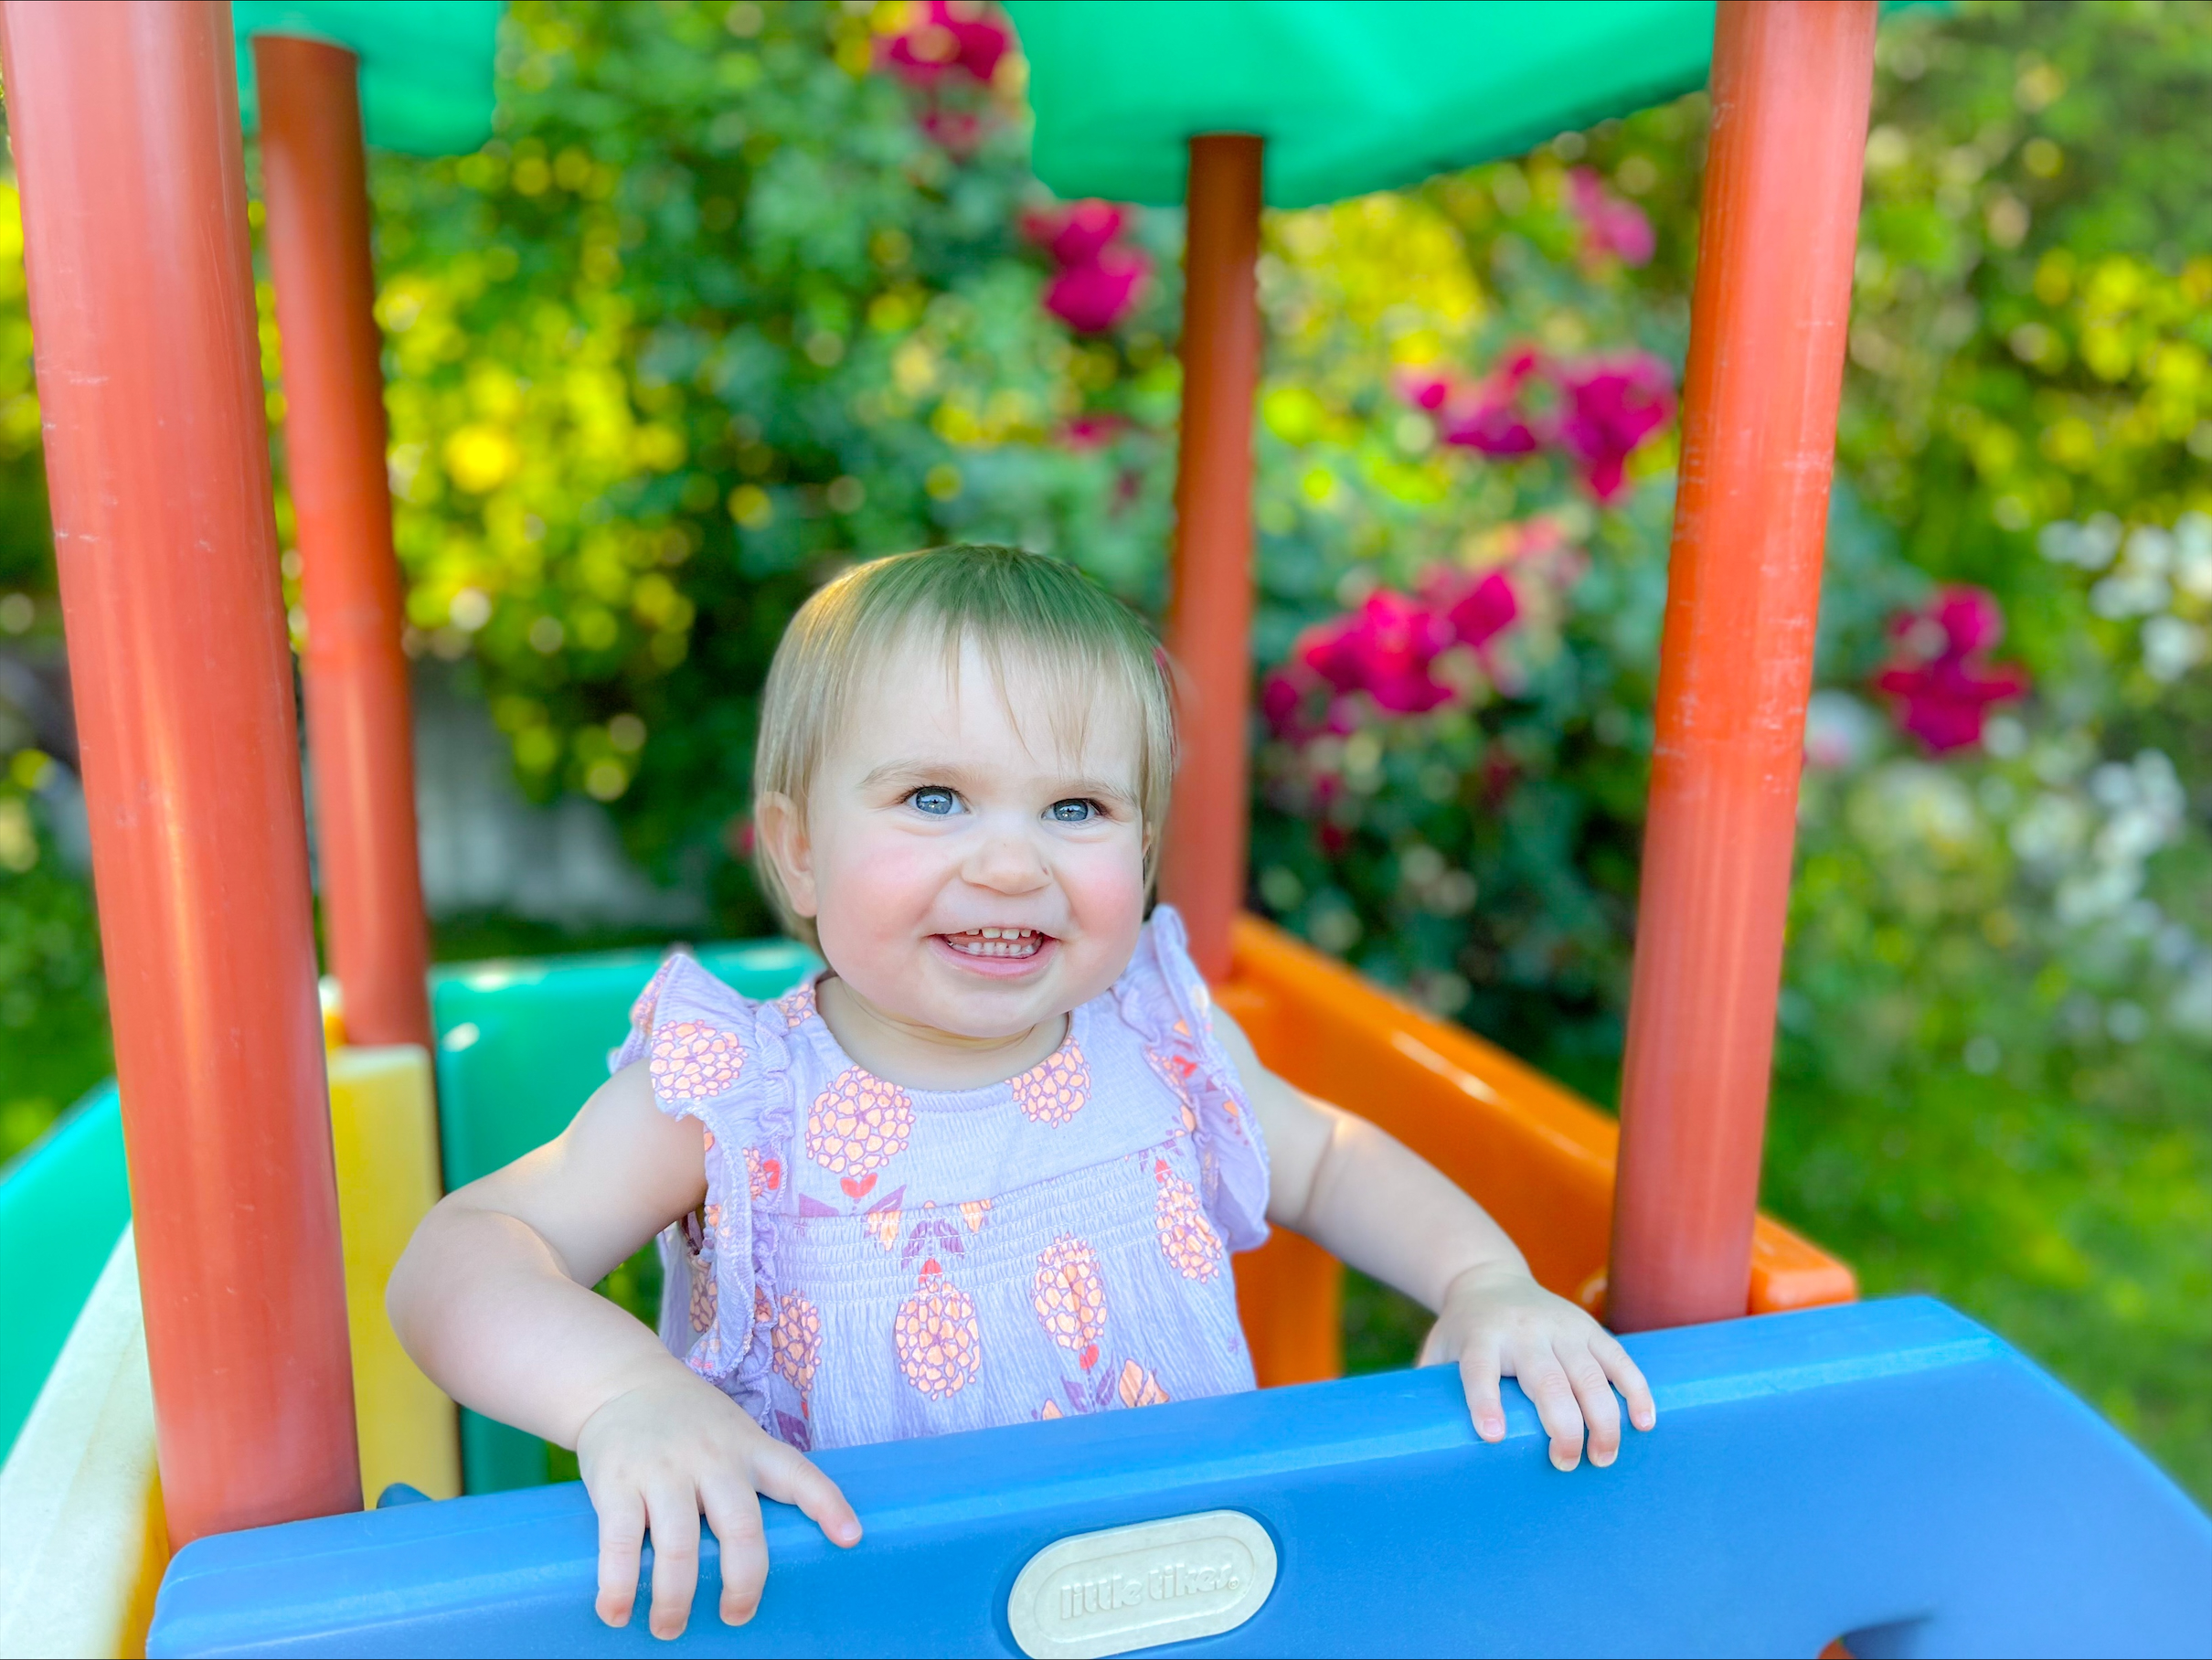 Image: Toddler with blonde hair and blue eyes smiles from inside a multi-colored outdoor playset.